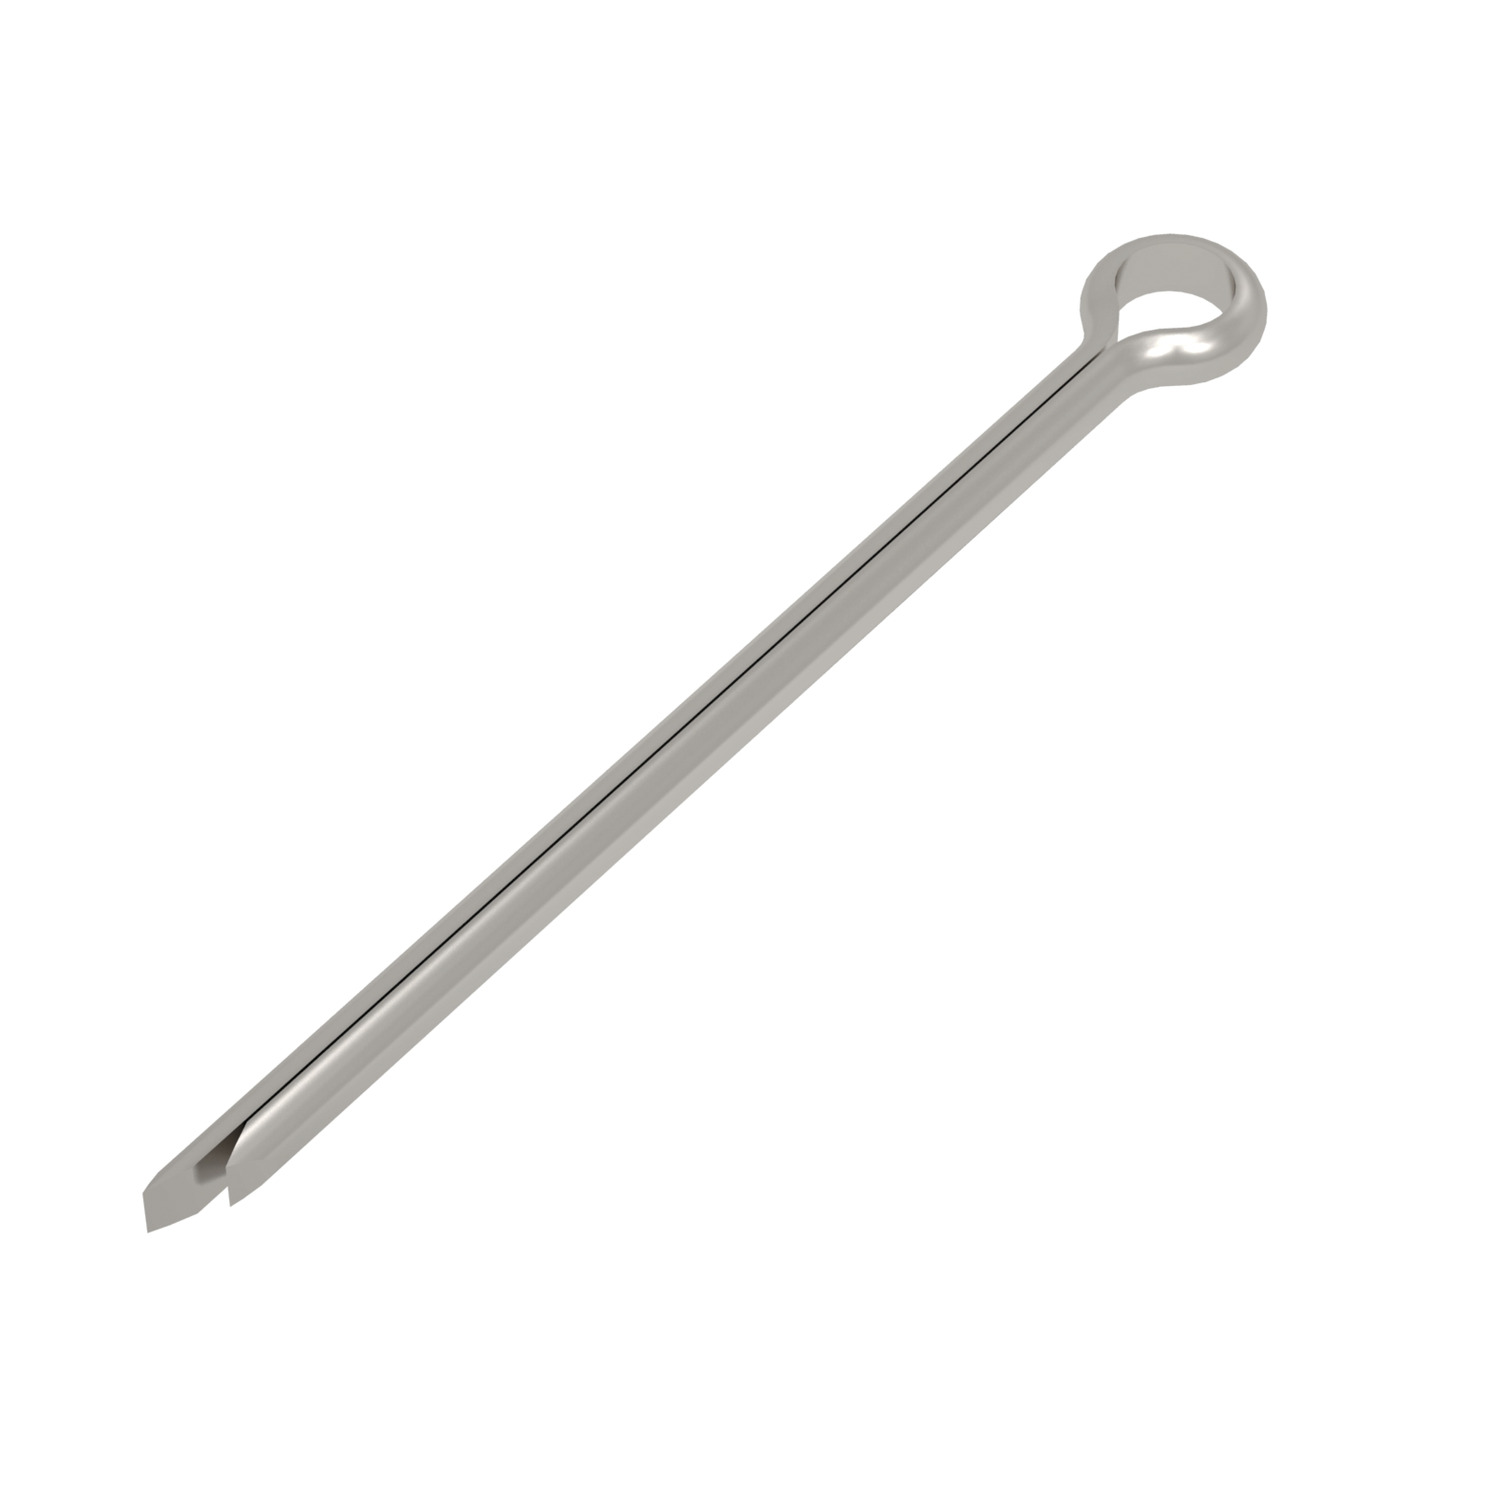 P1241.016-032 Stainless Cotter Pins Ø1.6x32 A2 s/s 